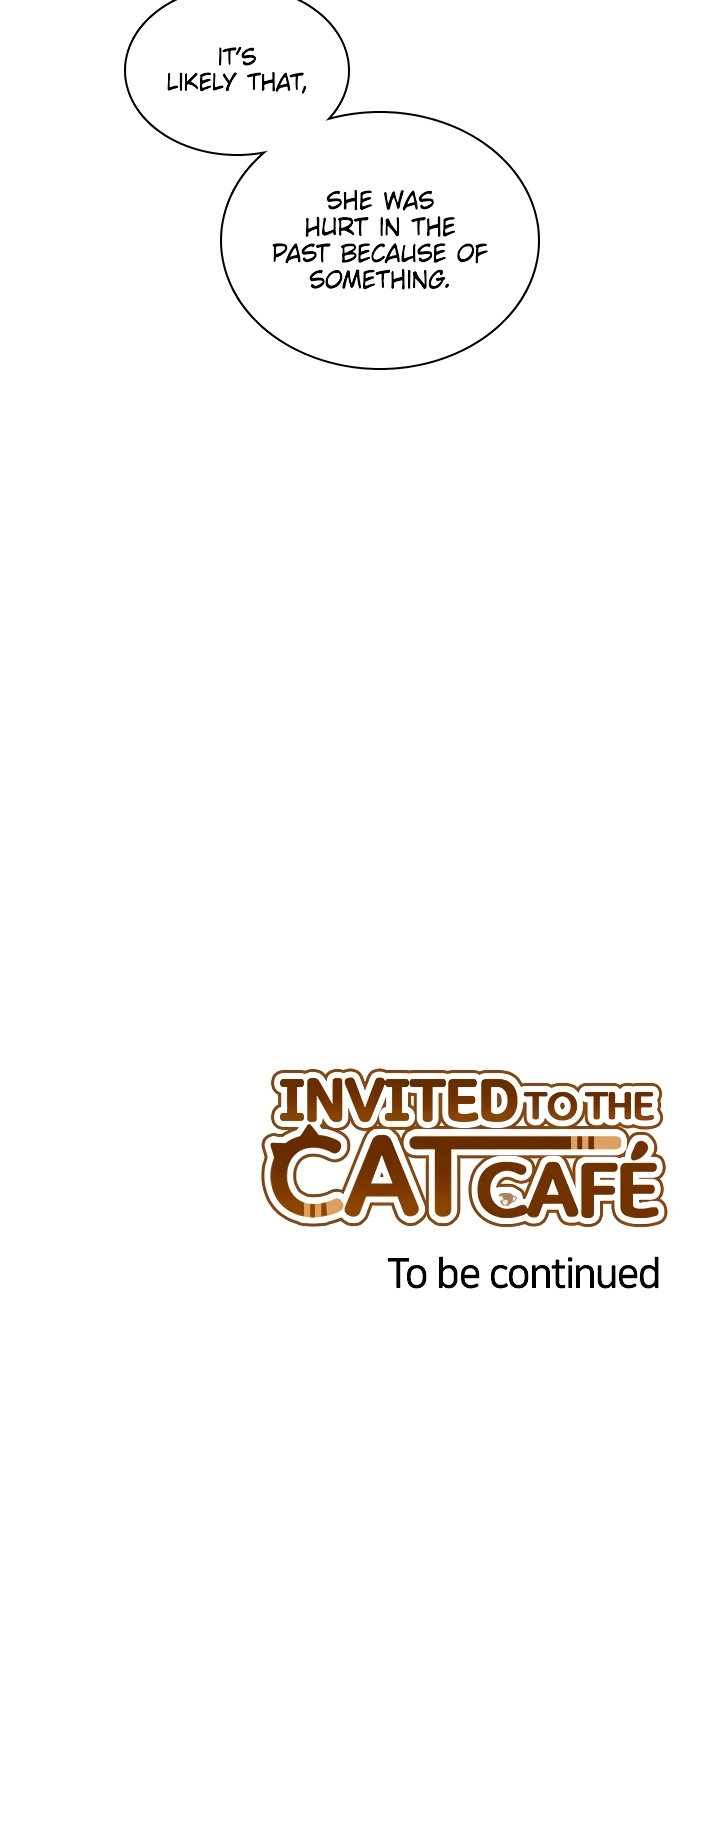 INVITED TO THE CAT CAFÉ image